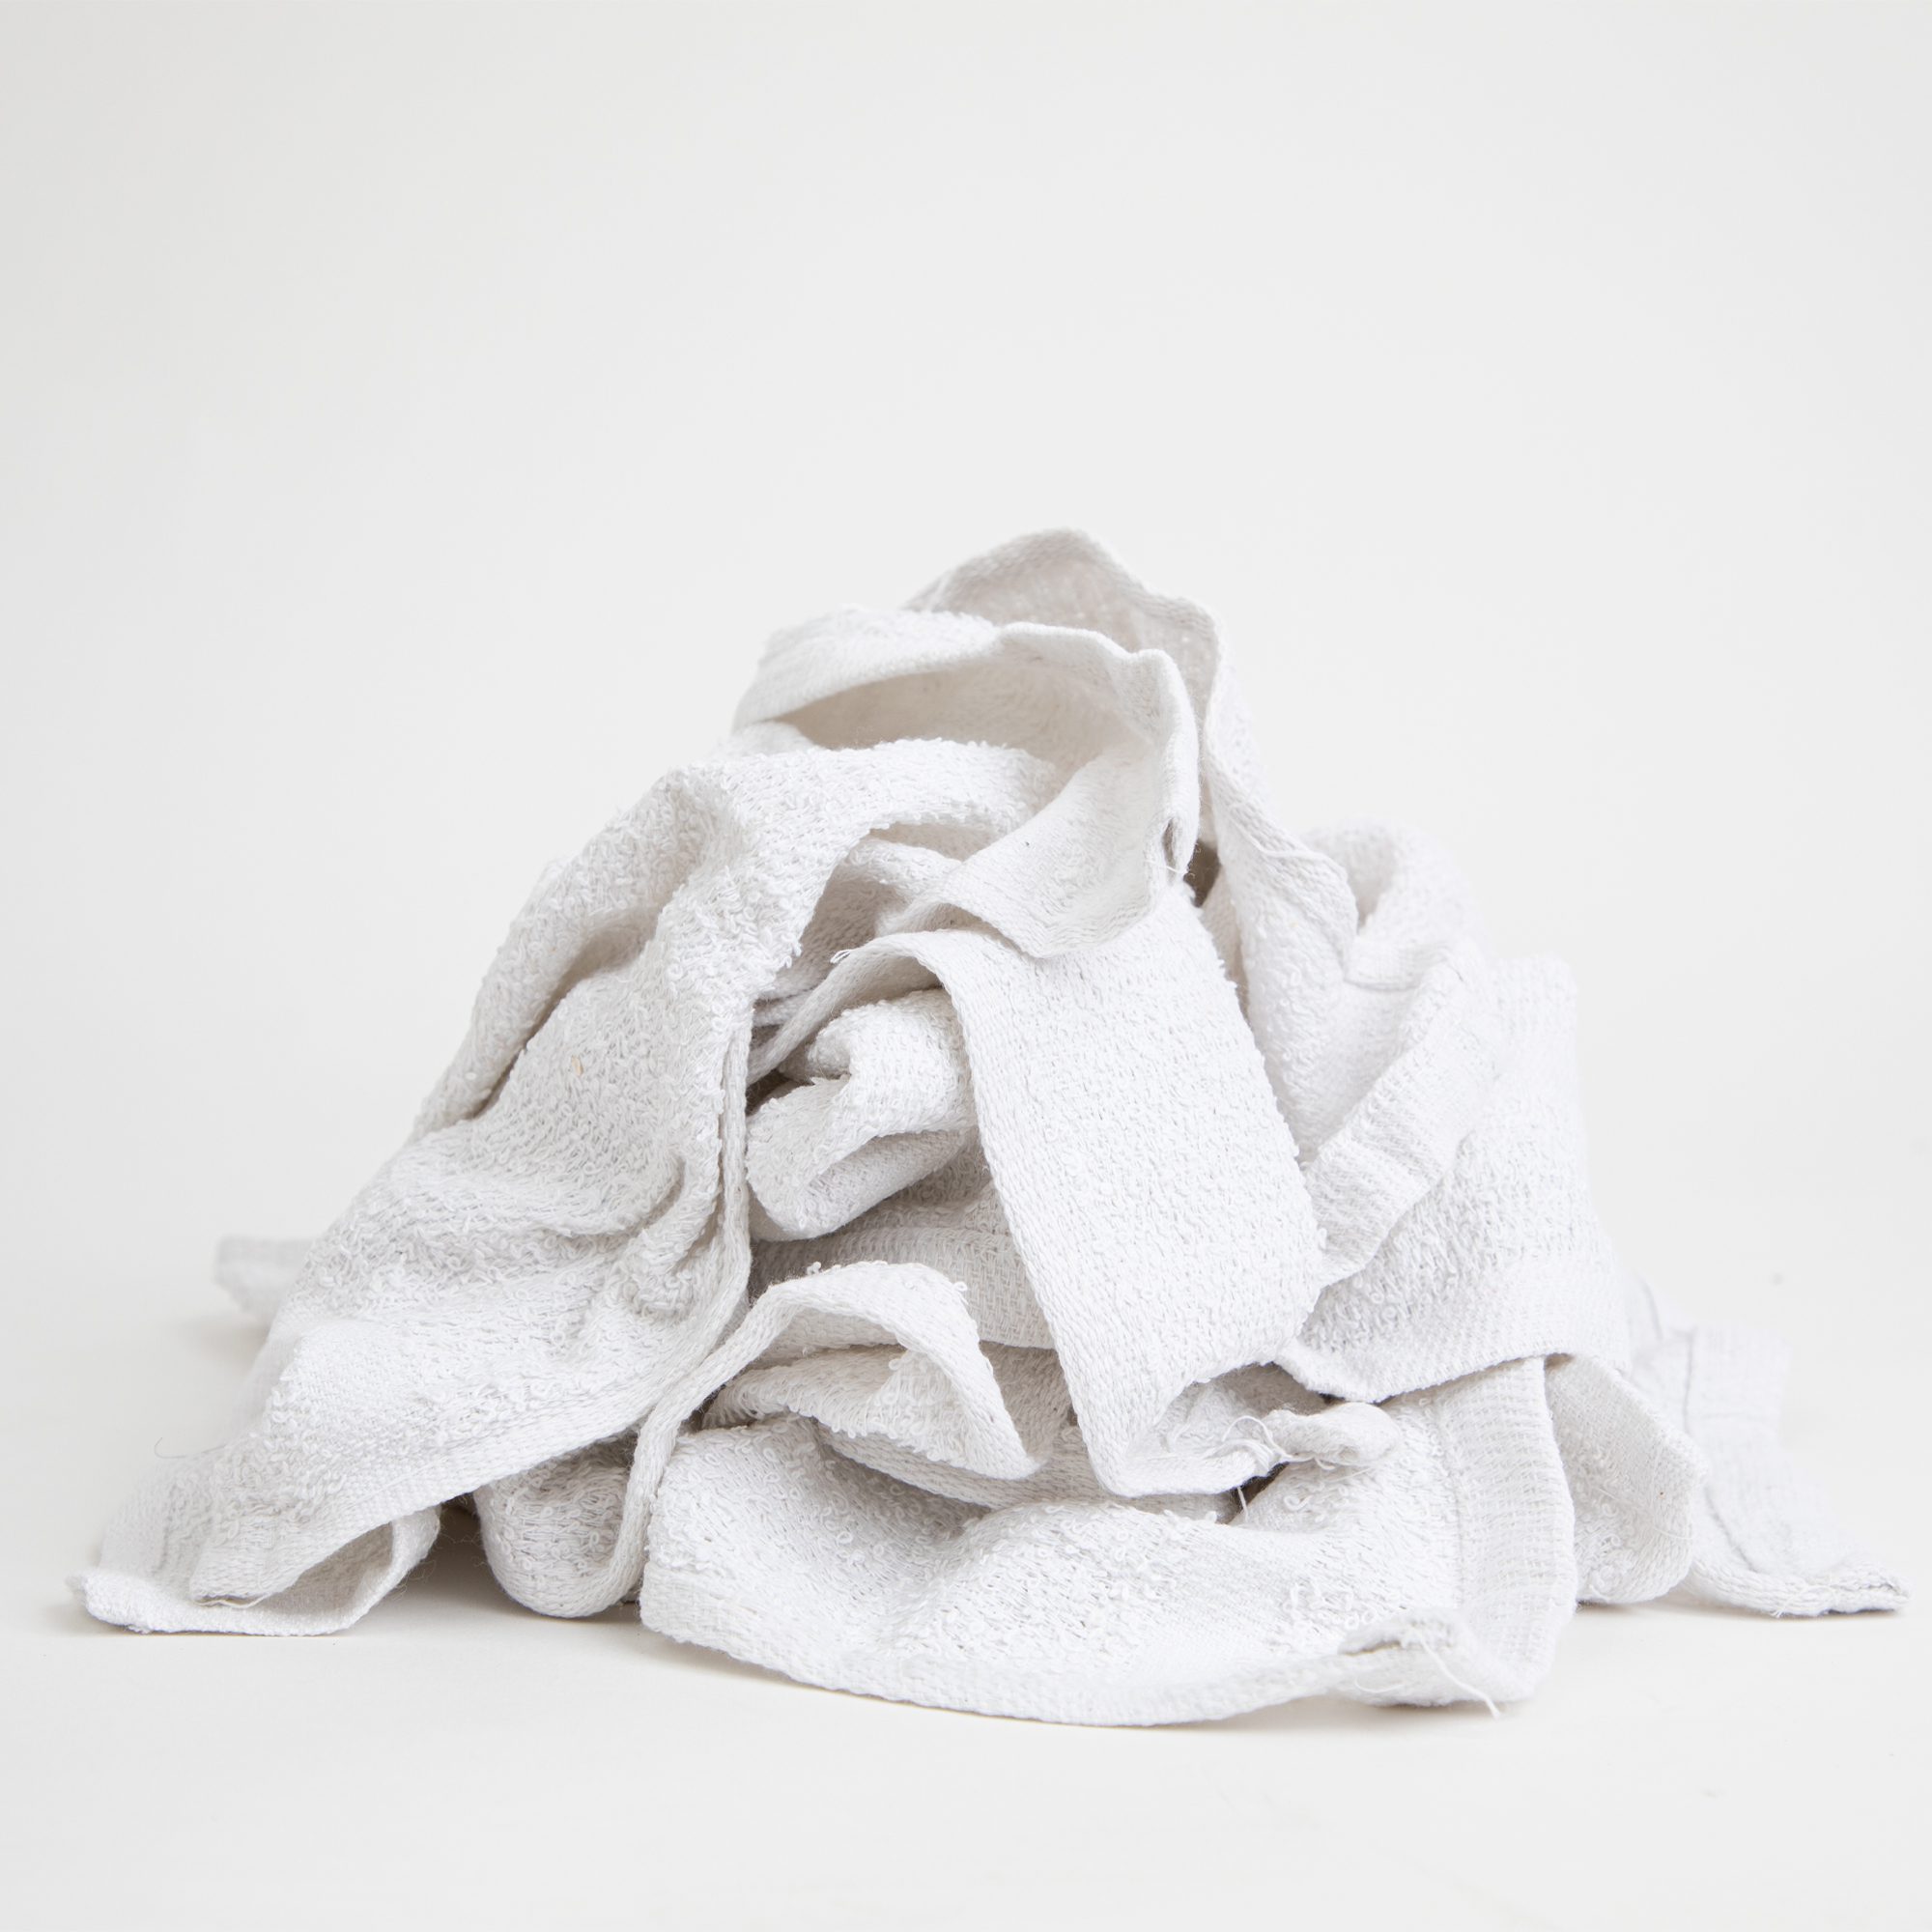 White Terry Towels – Cleaning Supplies – Monarch Brands